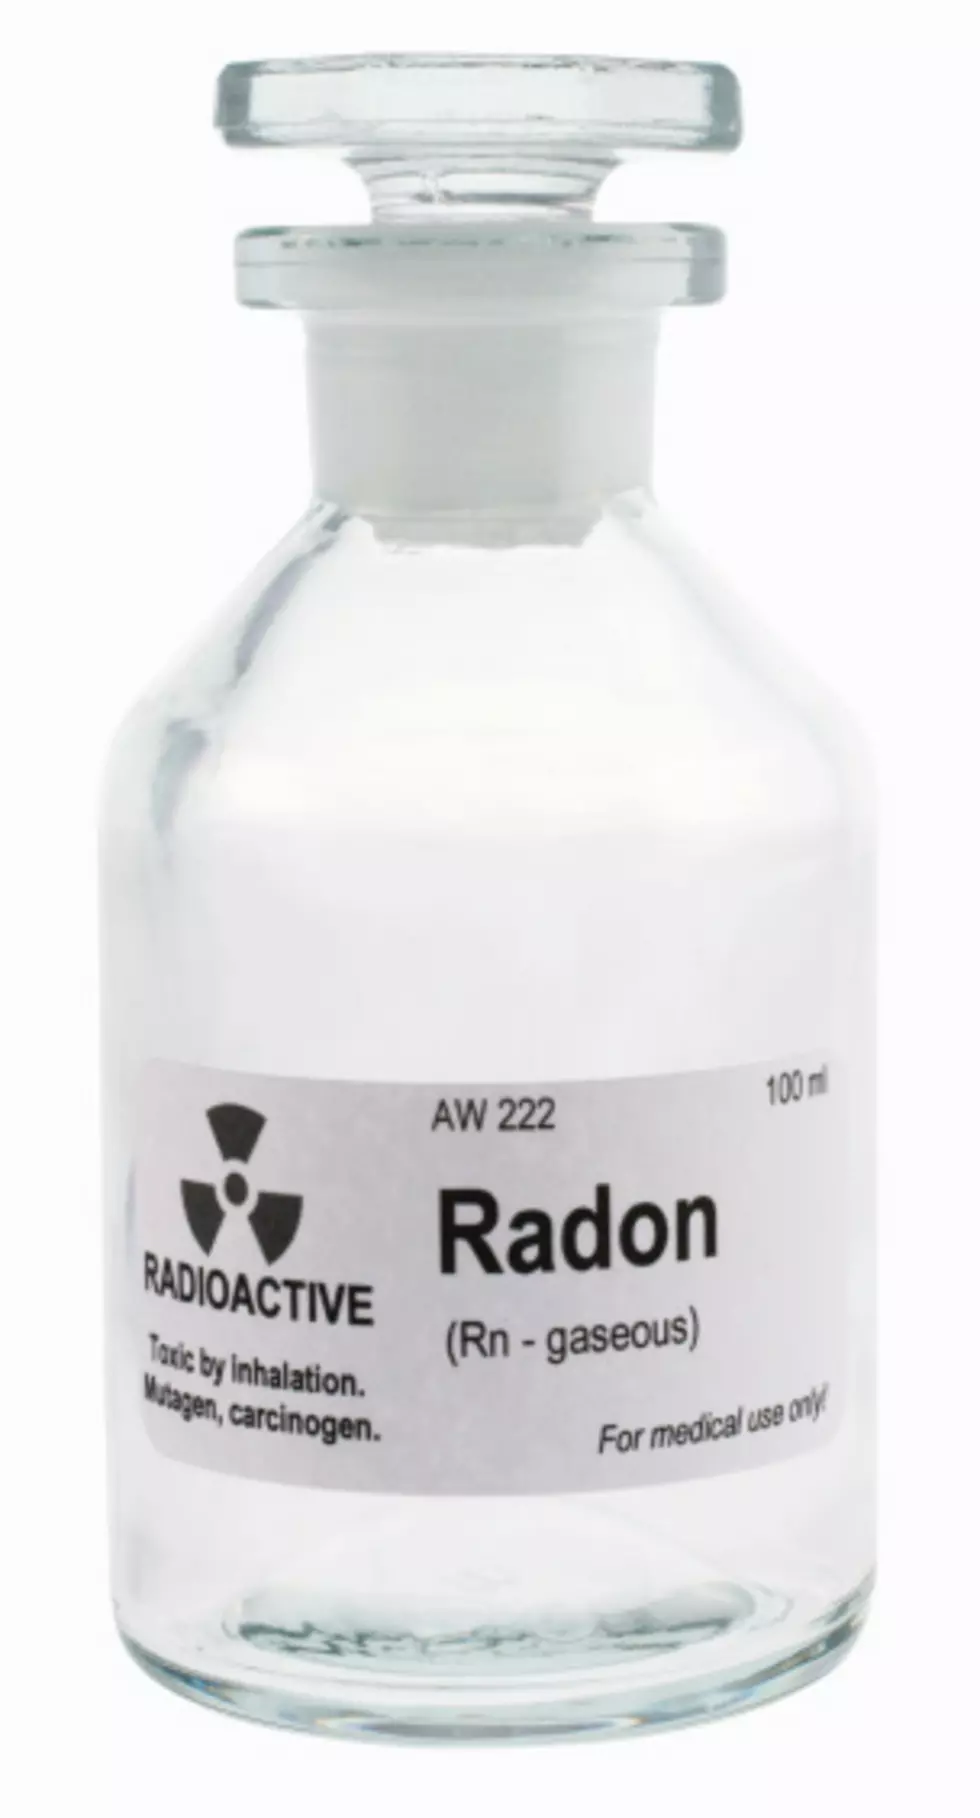 Free Radon Test Kits Available to Kent County Residents